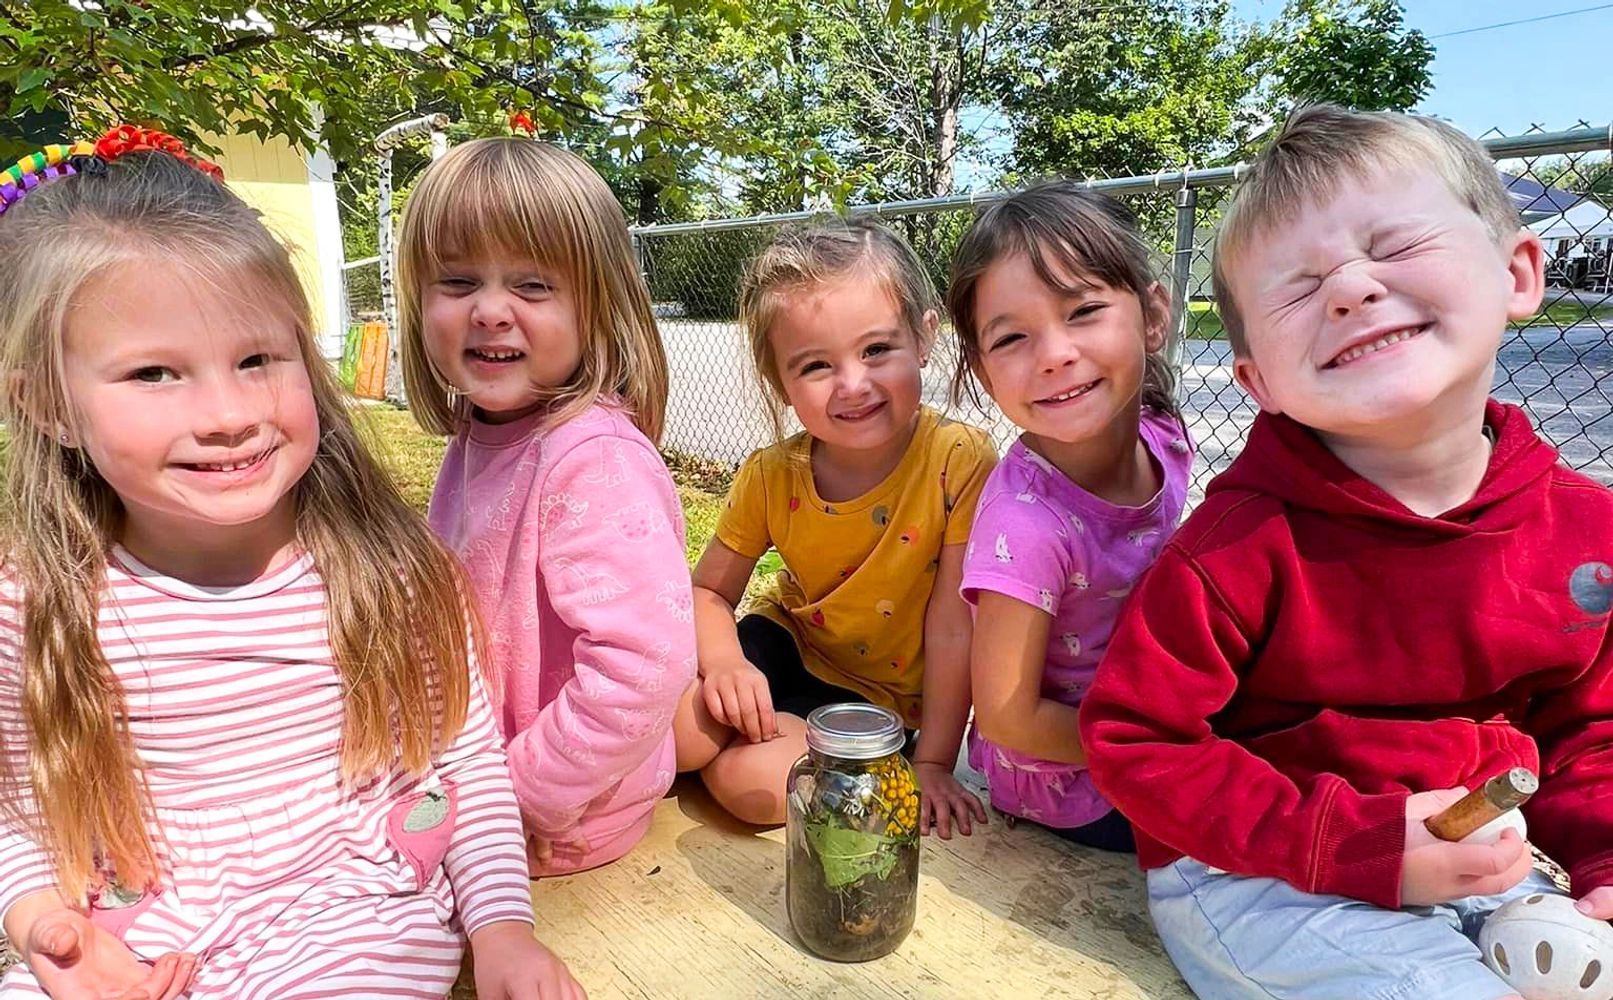 Group of kids smiling at picnic table